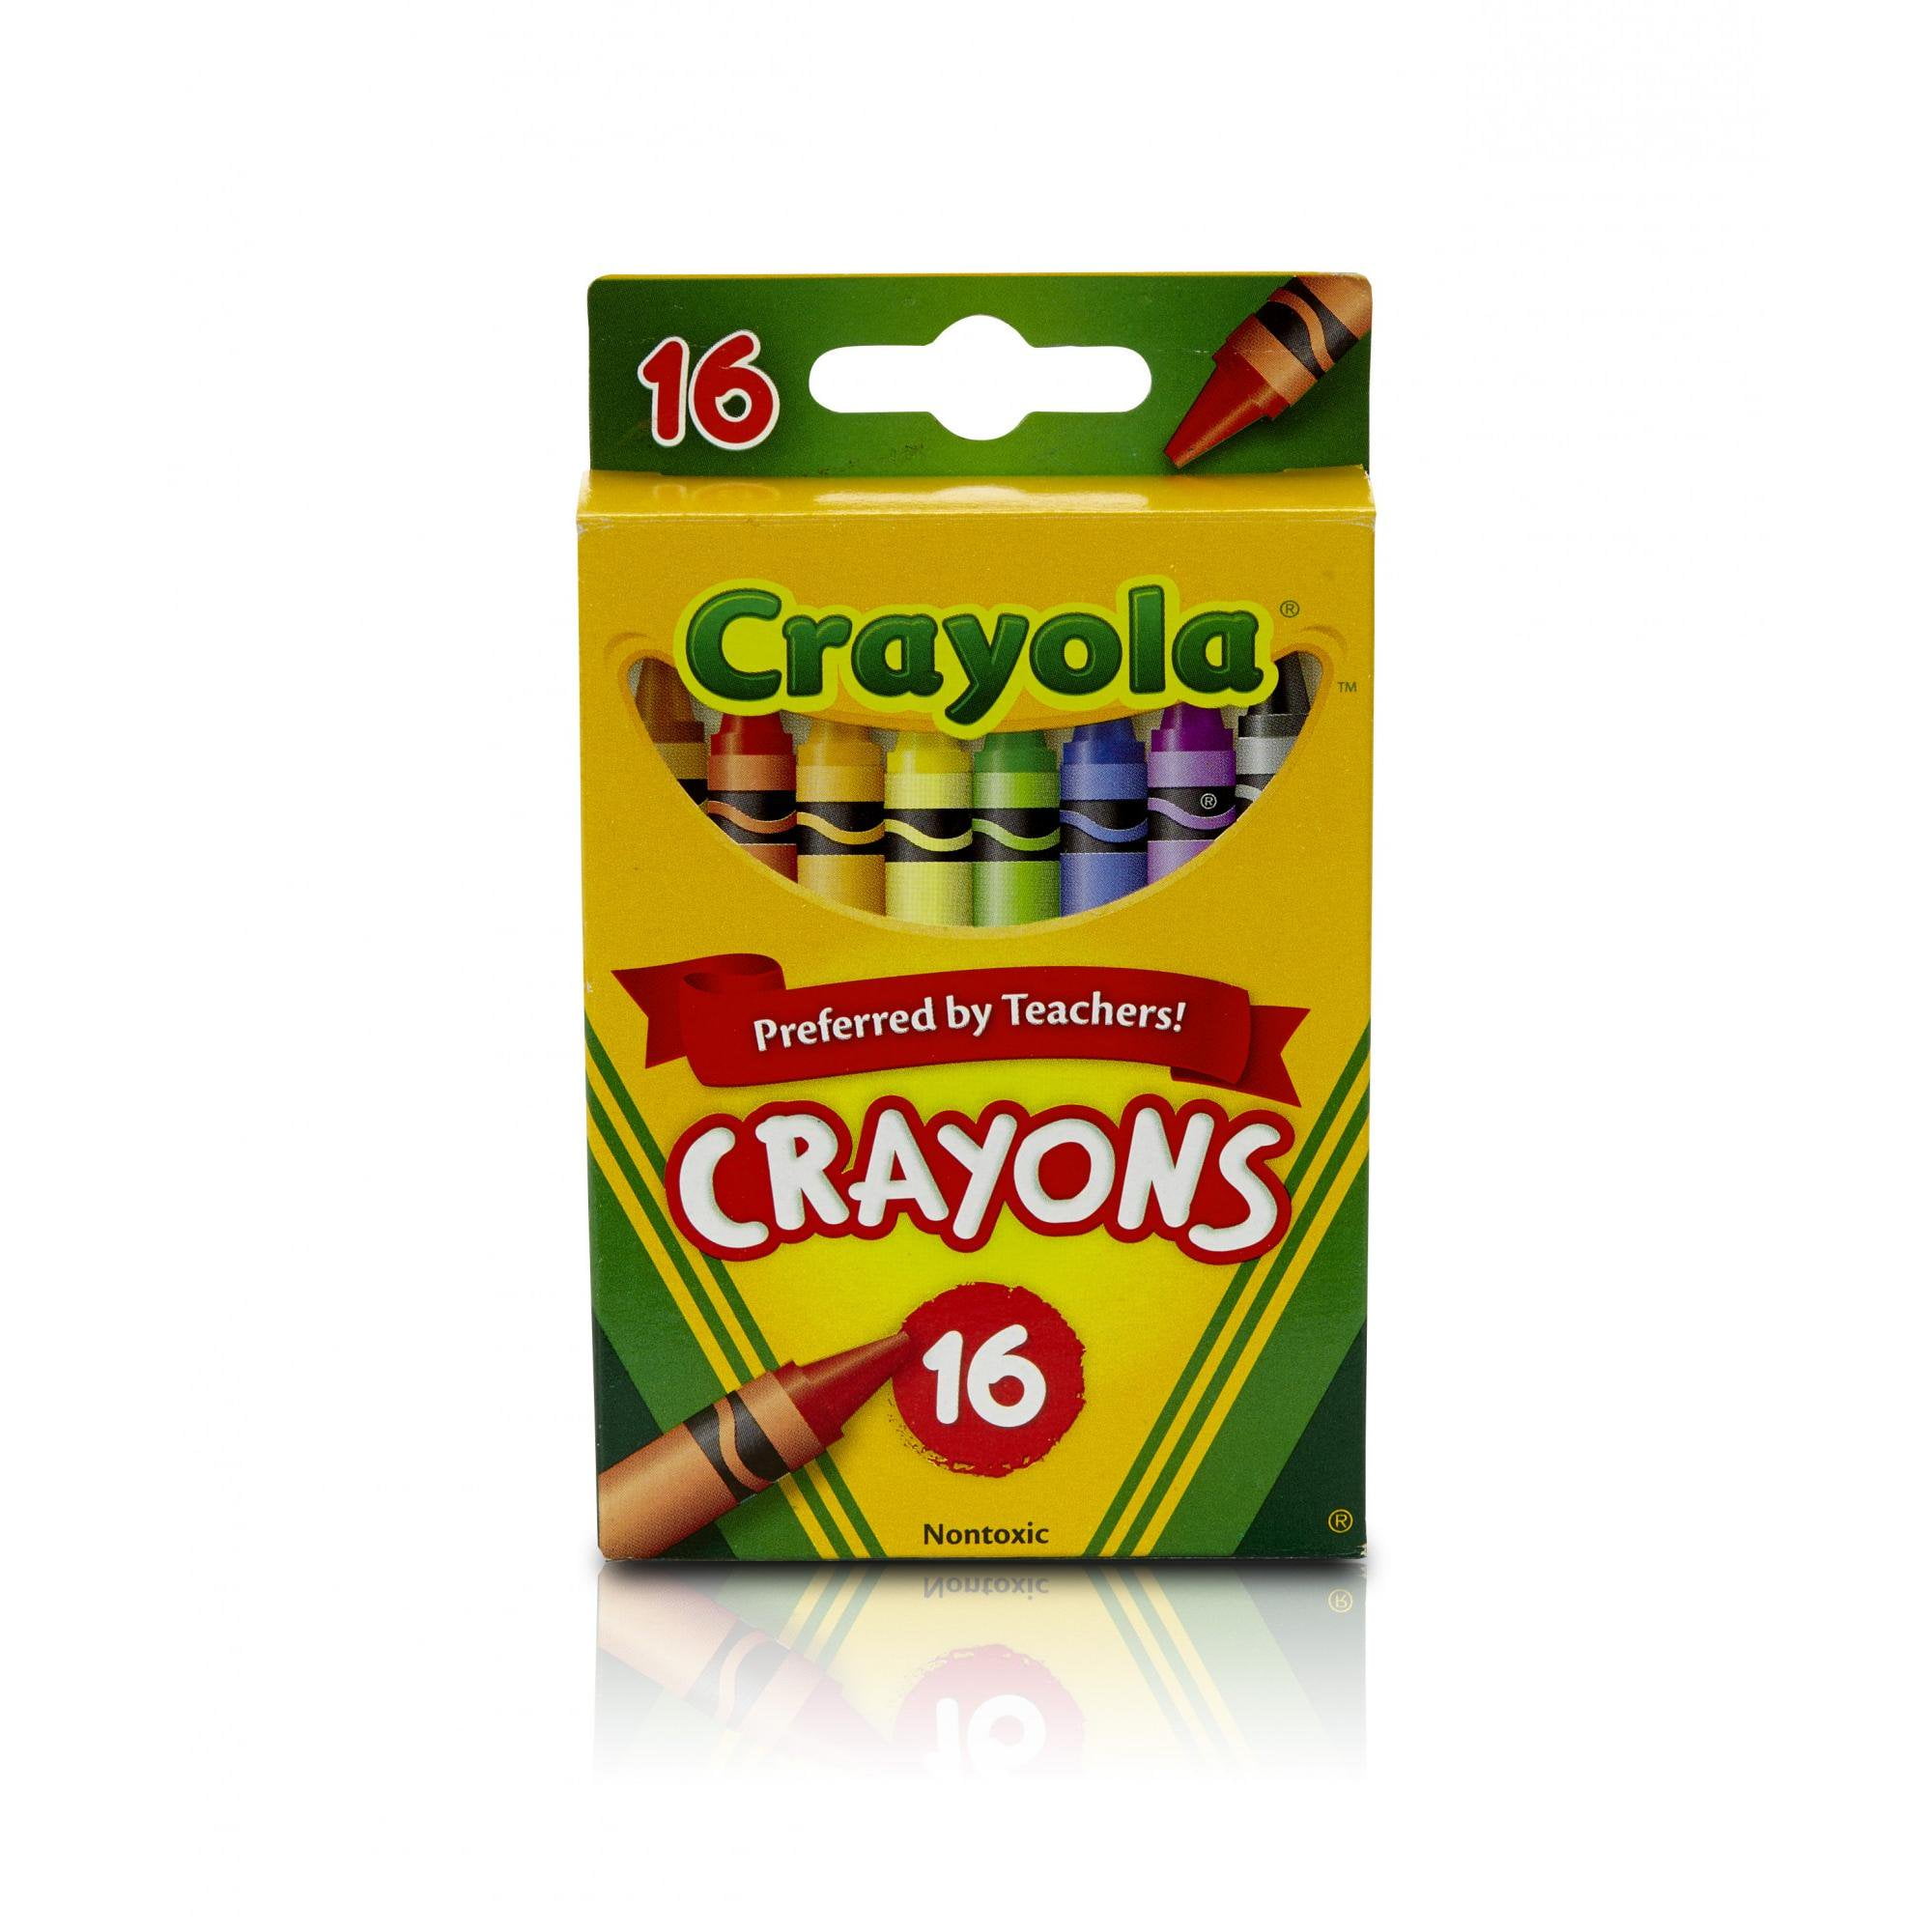 Set of 2 Crayola Classic Crayons, 16-ct. Packs Made in USA